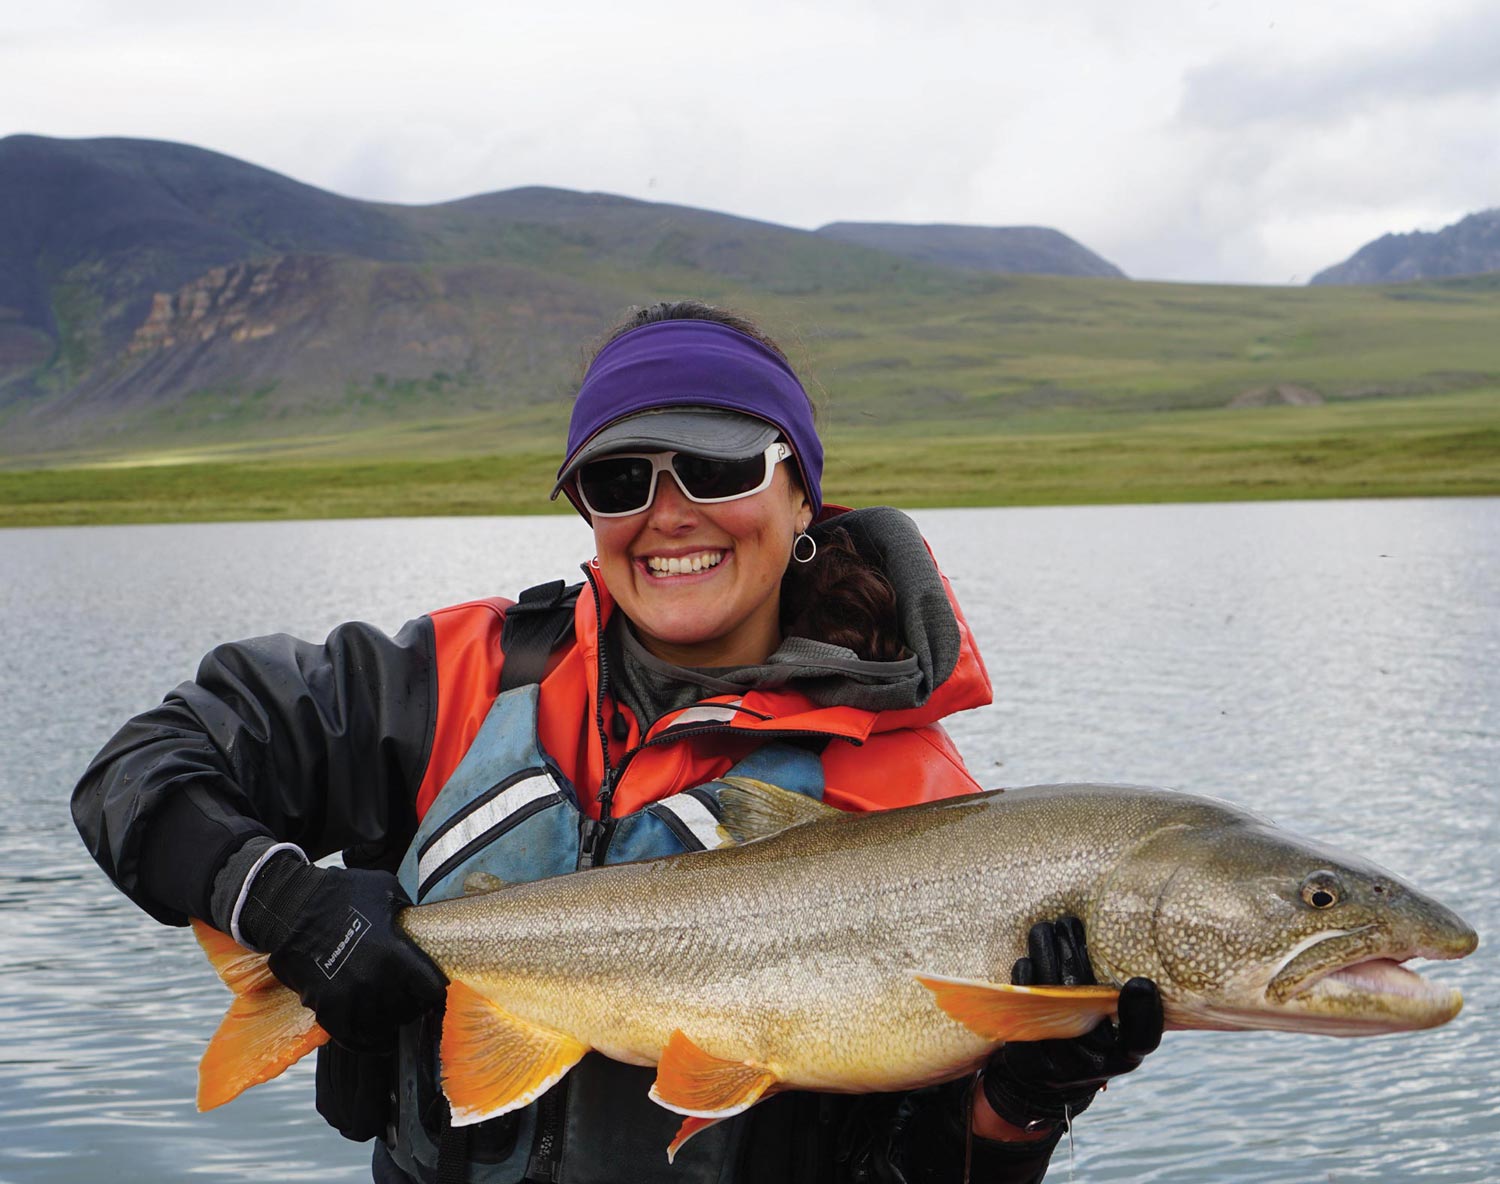 a woman smiles holding a large fish while in the middle of a body of water